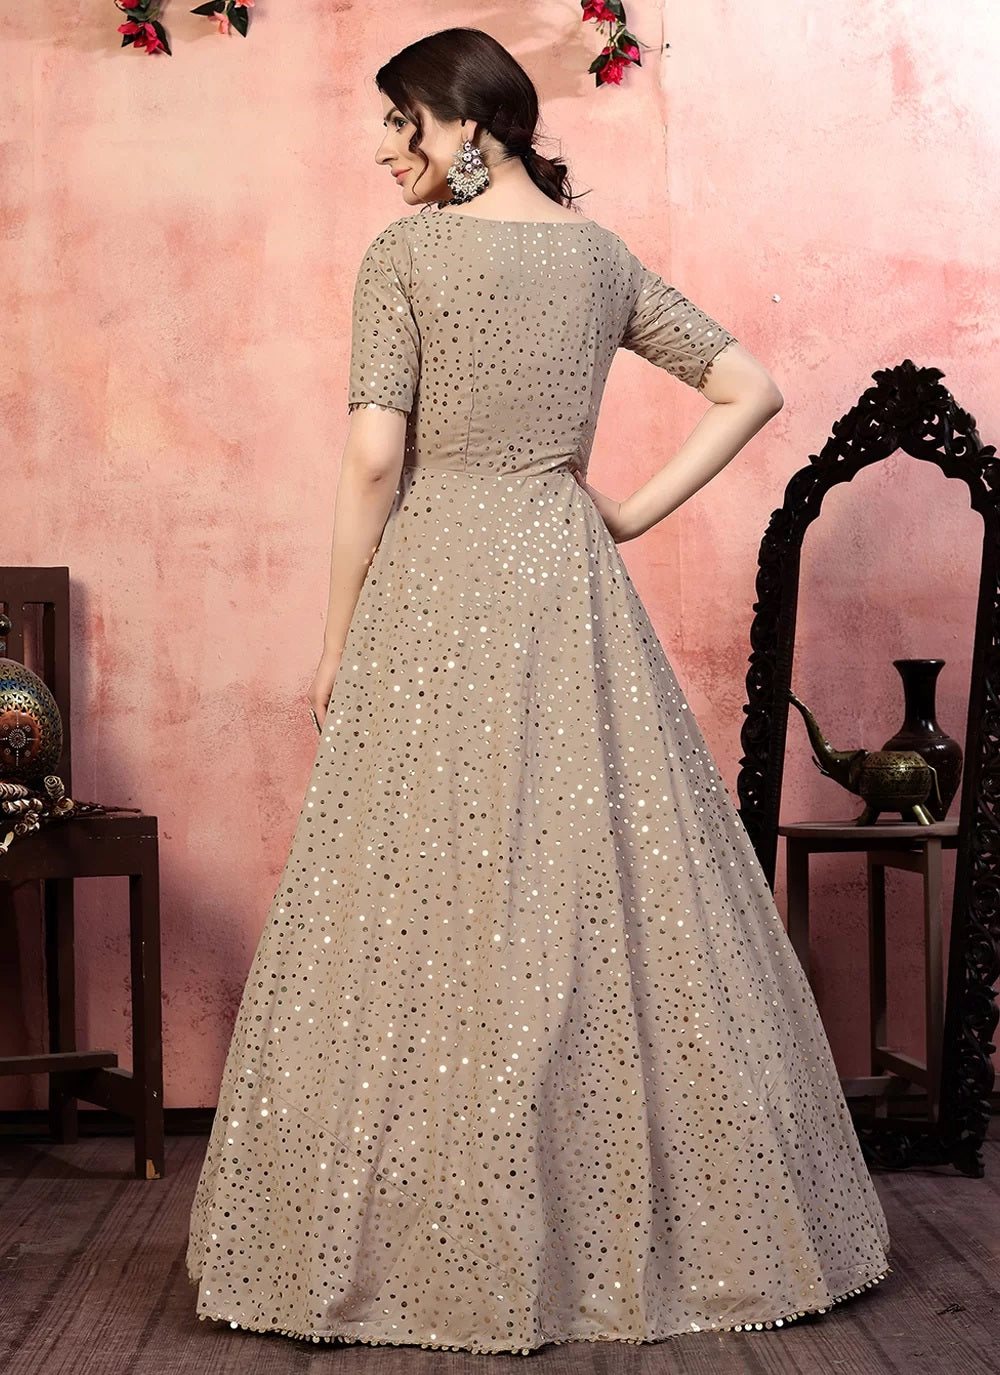 Dresses and Gowns | Party wear long gowns, Long gown dress, Saree dress